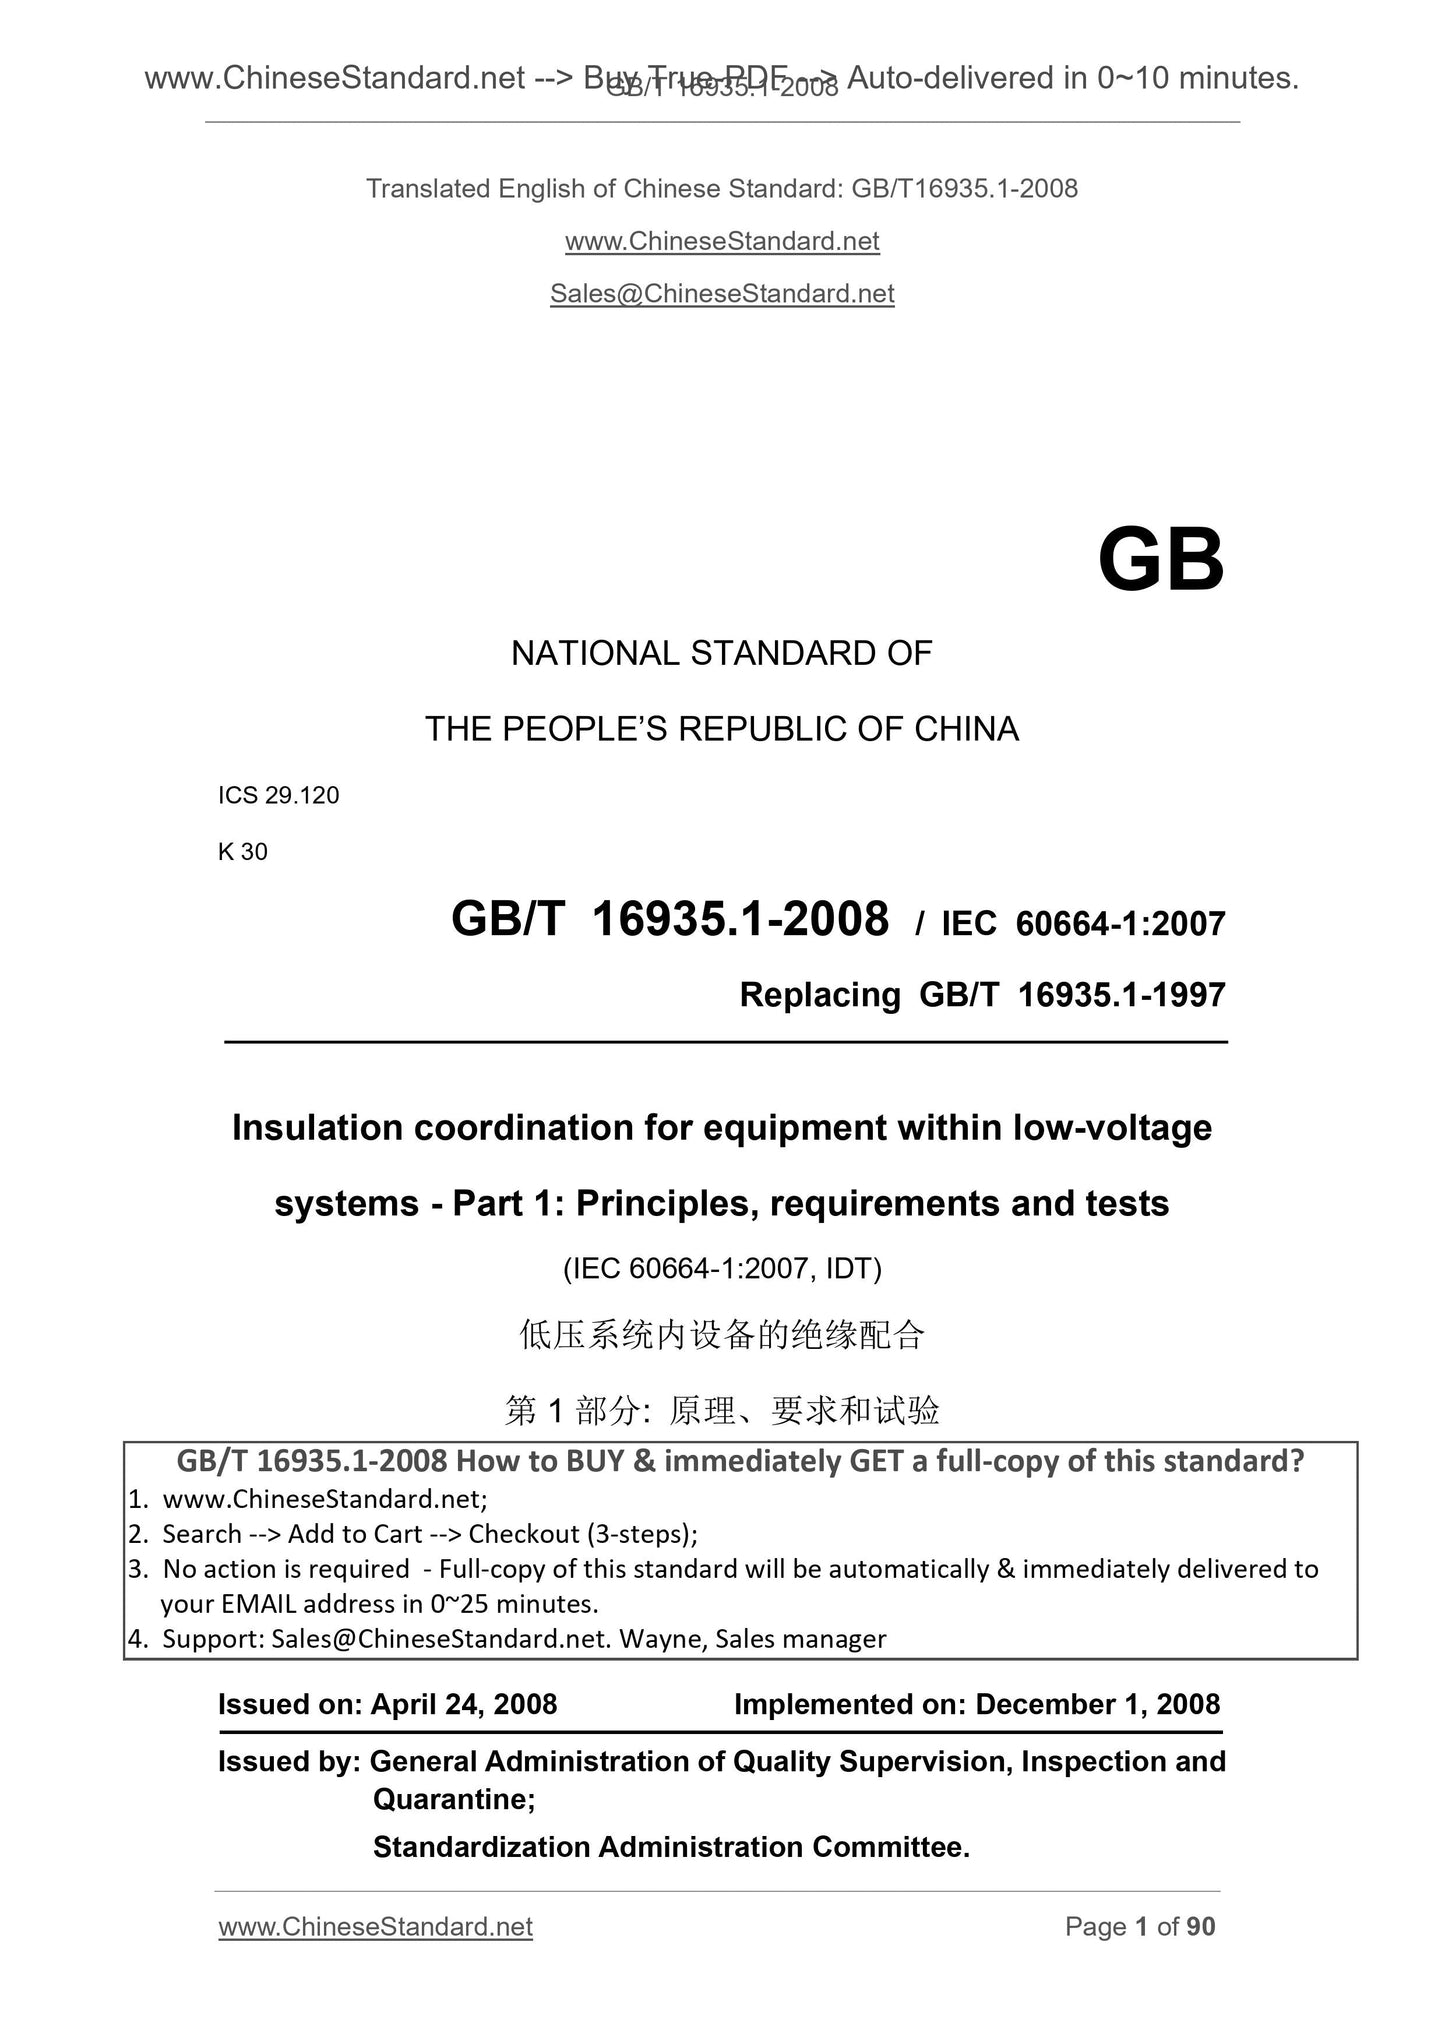 GB/T 16935.1-2008 Page 1